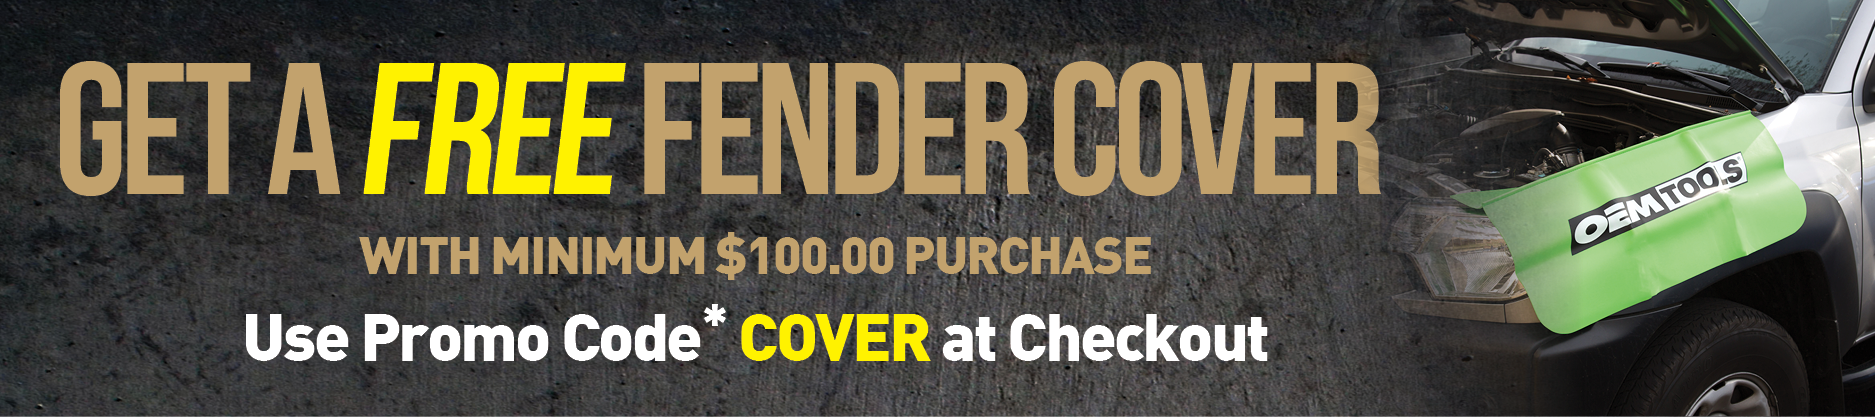 FREE Fender Cover With Minimum $100 Purchase Promo Code COVER